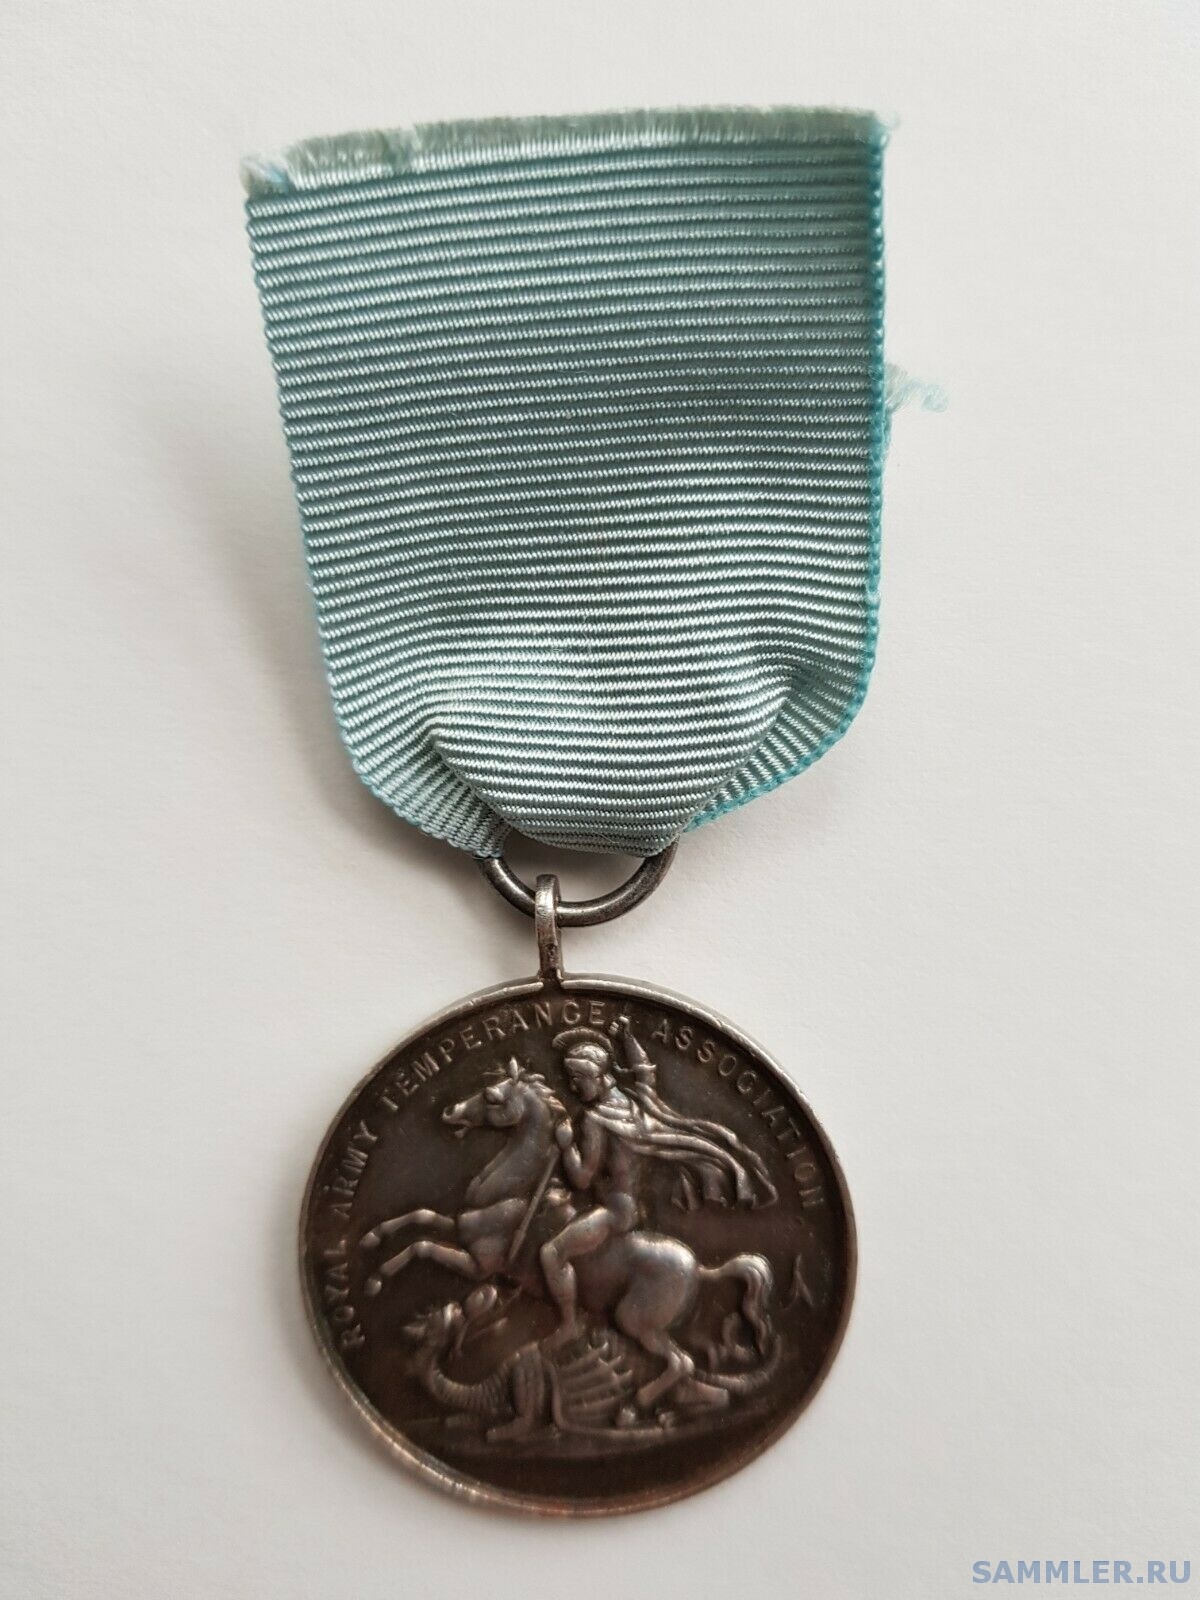 Royal-Army-Temperance-Association-Medal-Watch-And-Be.jpg